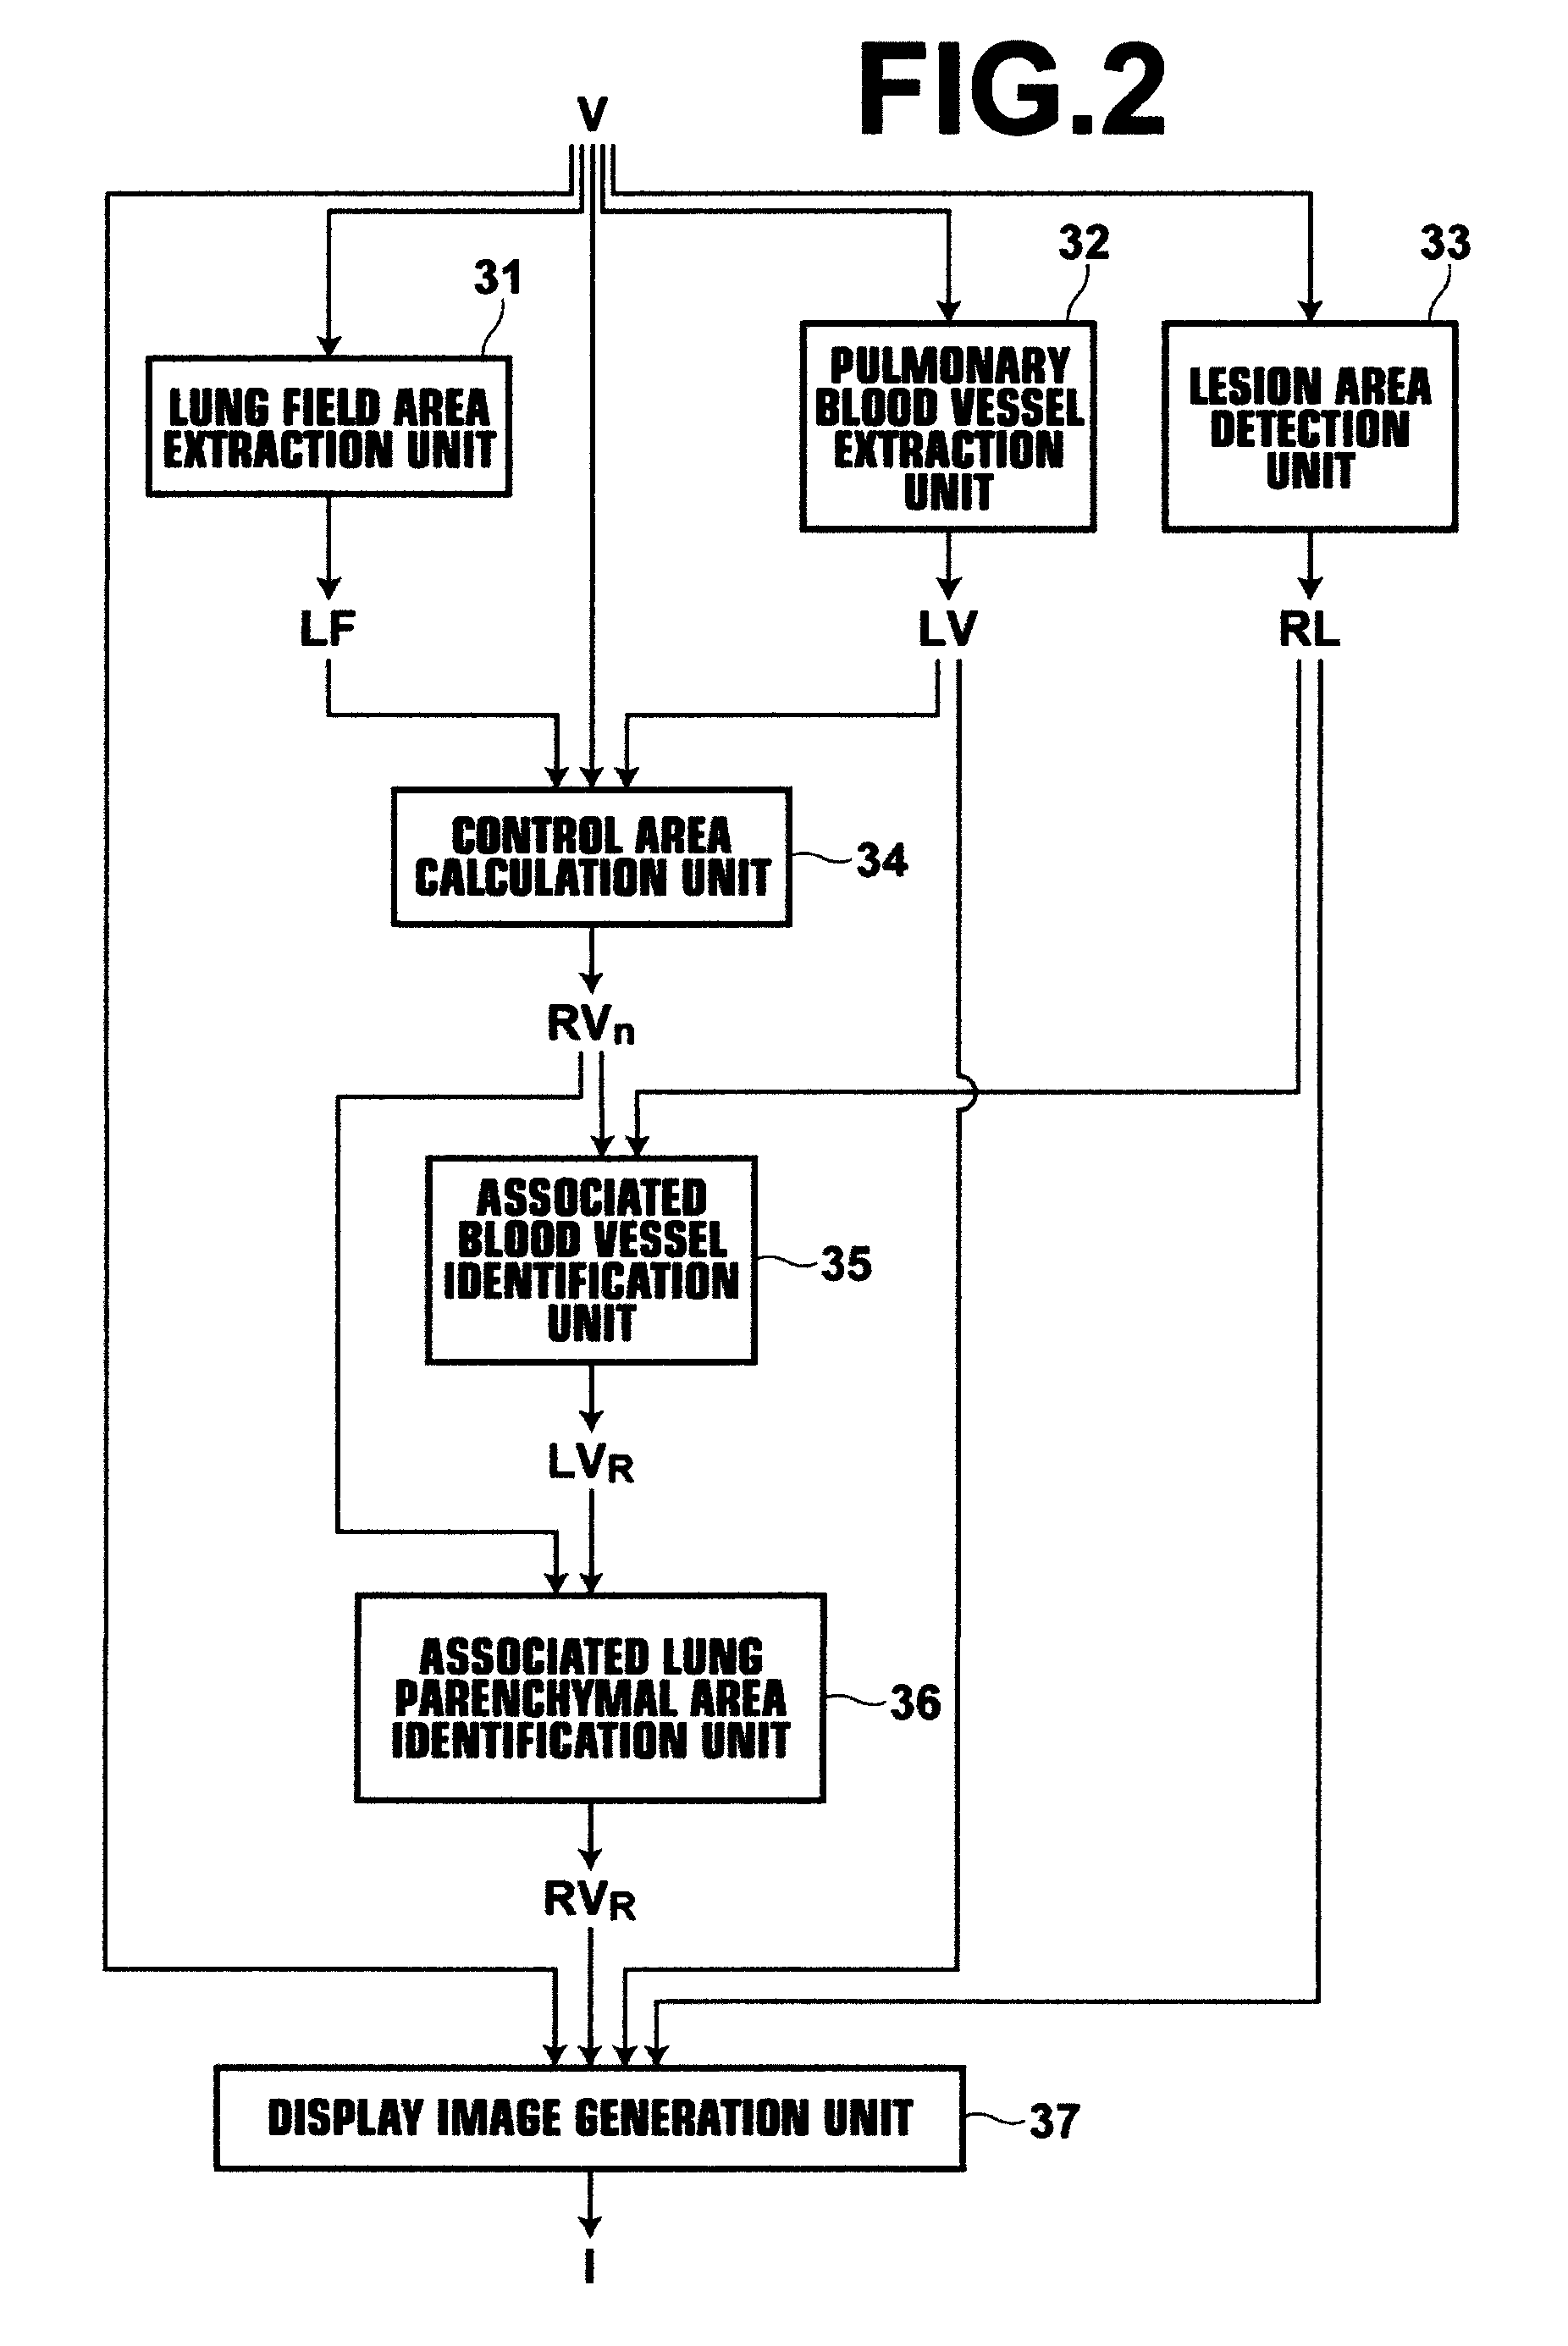 Apparatus, method, and computer readable medium for assisting medical image diagnosis using 3-D images representing internal structure